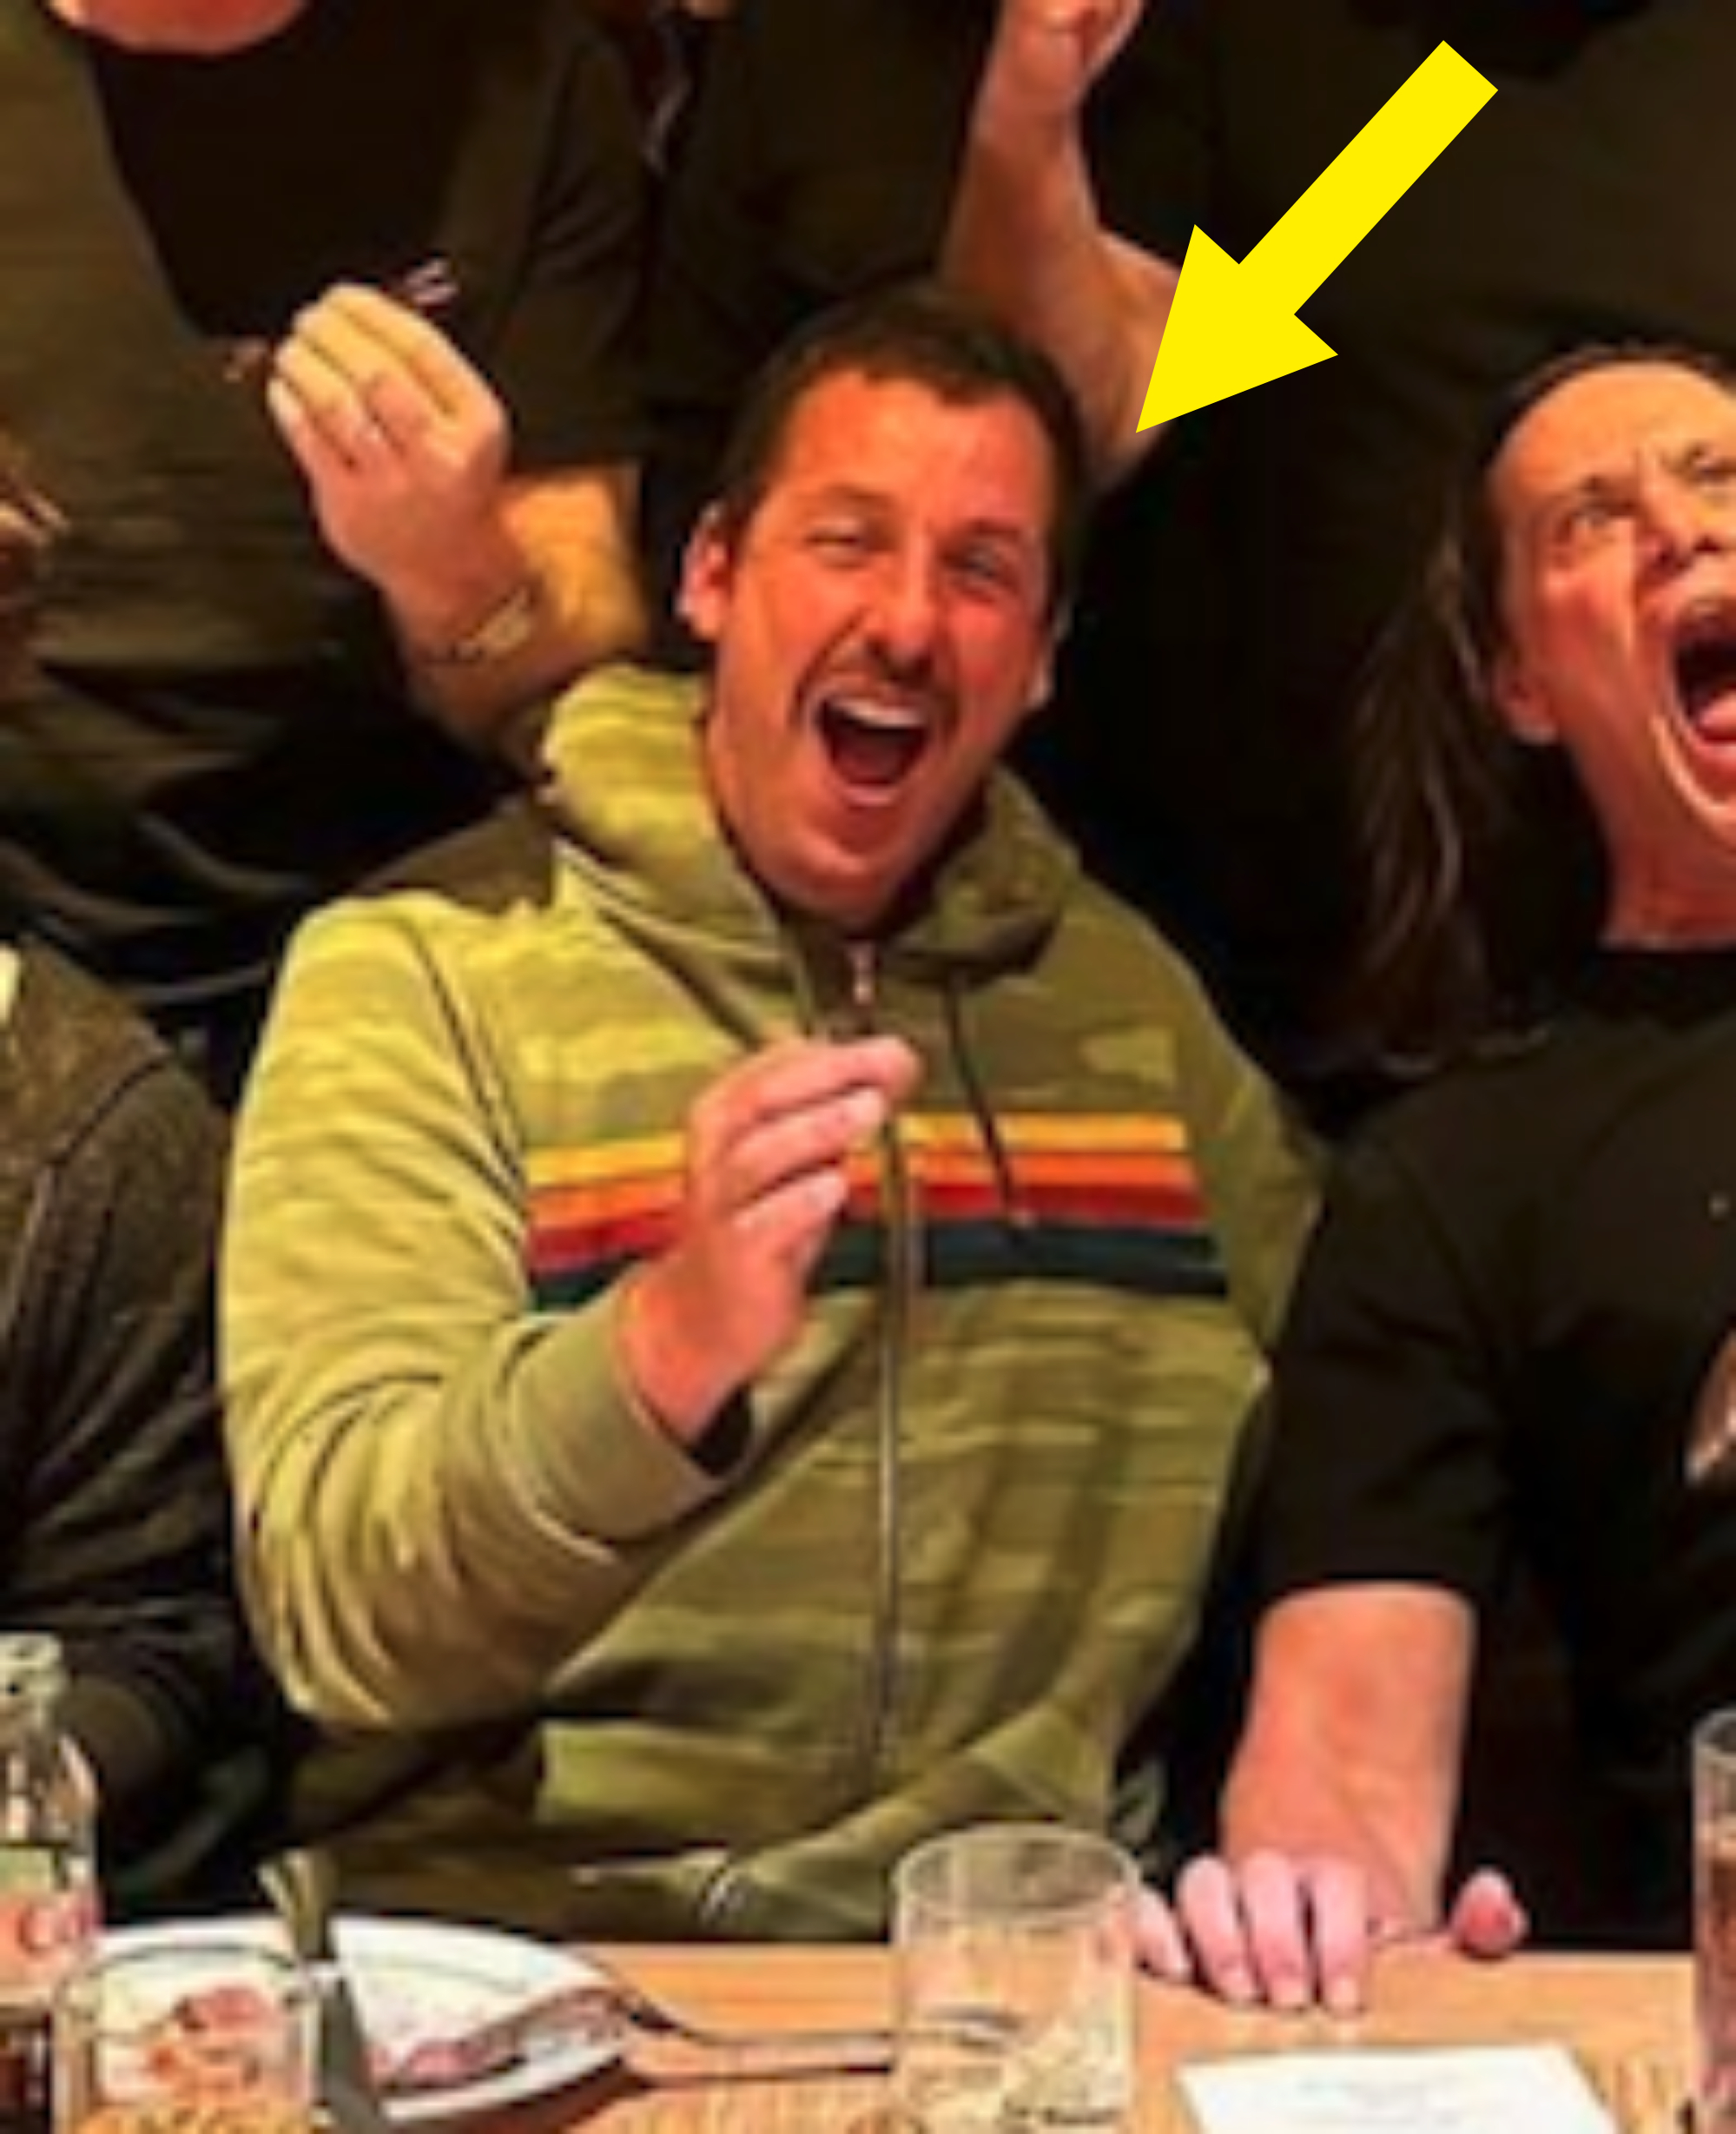 Arrow pointing to Adam laughing